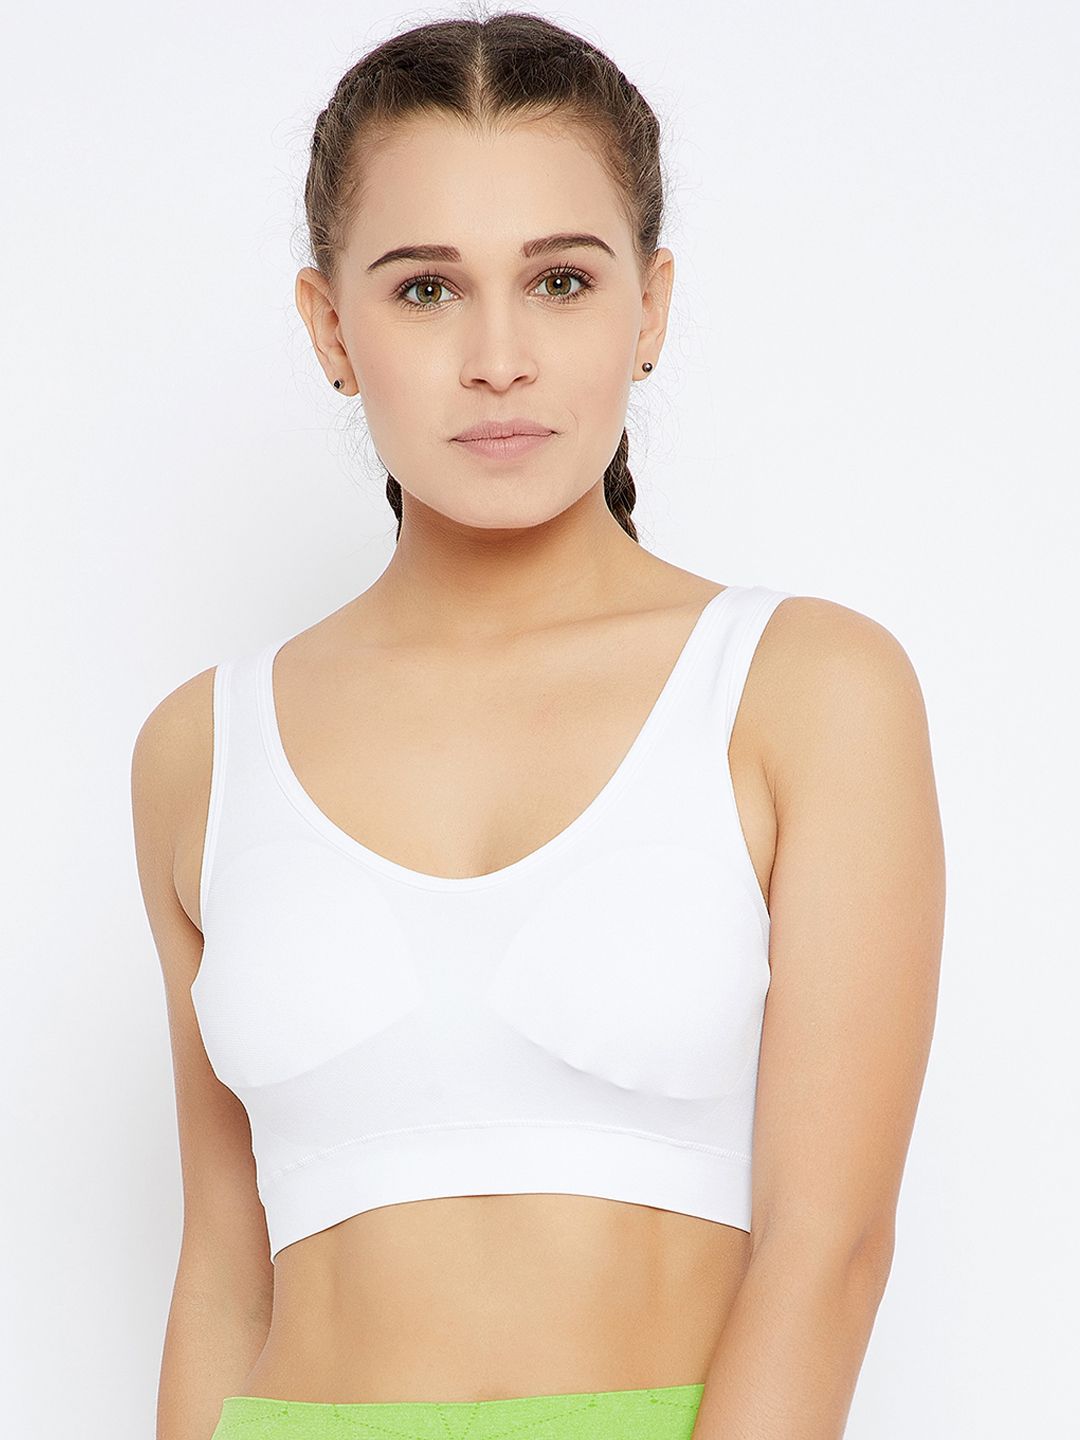 C9 AIRWEAR White Solid Non-Wired Non Padded Sports Bra PZ2134_White Price in India